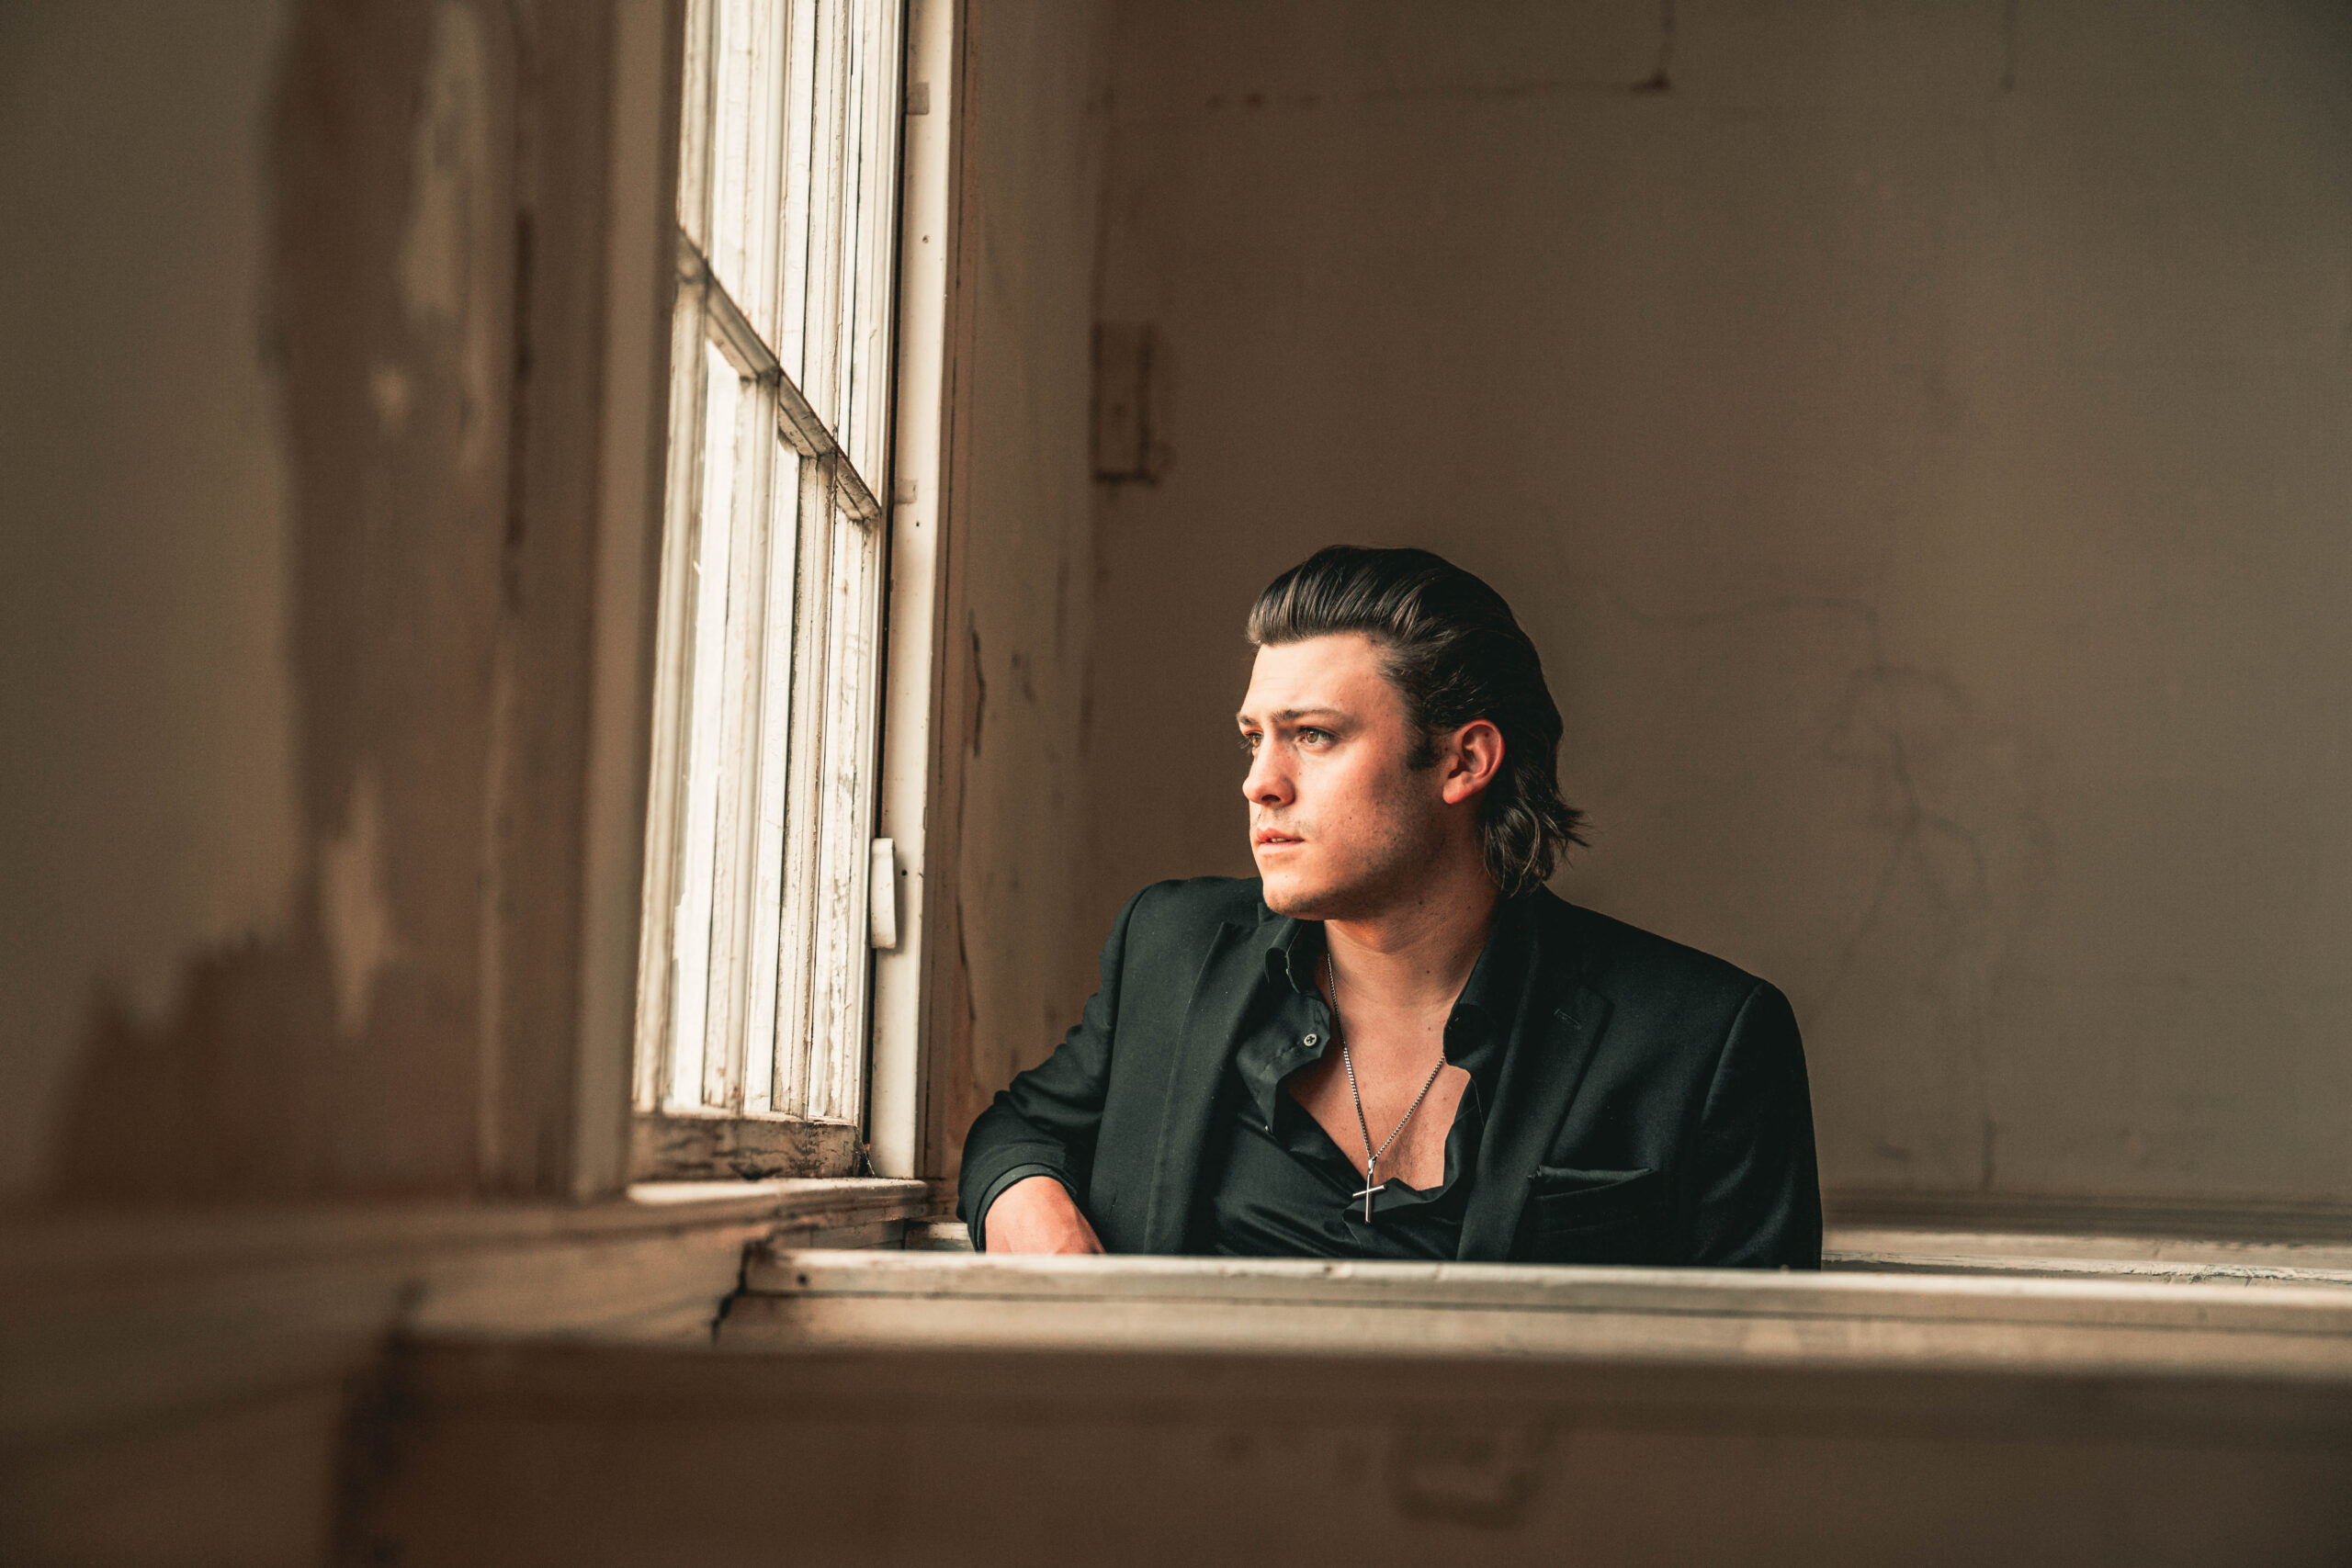 Logan Crosby Shares Romantic Country Tune “If You Ask Me” Just In Time for Wedding Season (Listen)